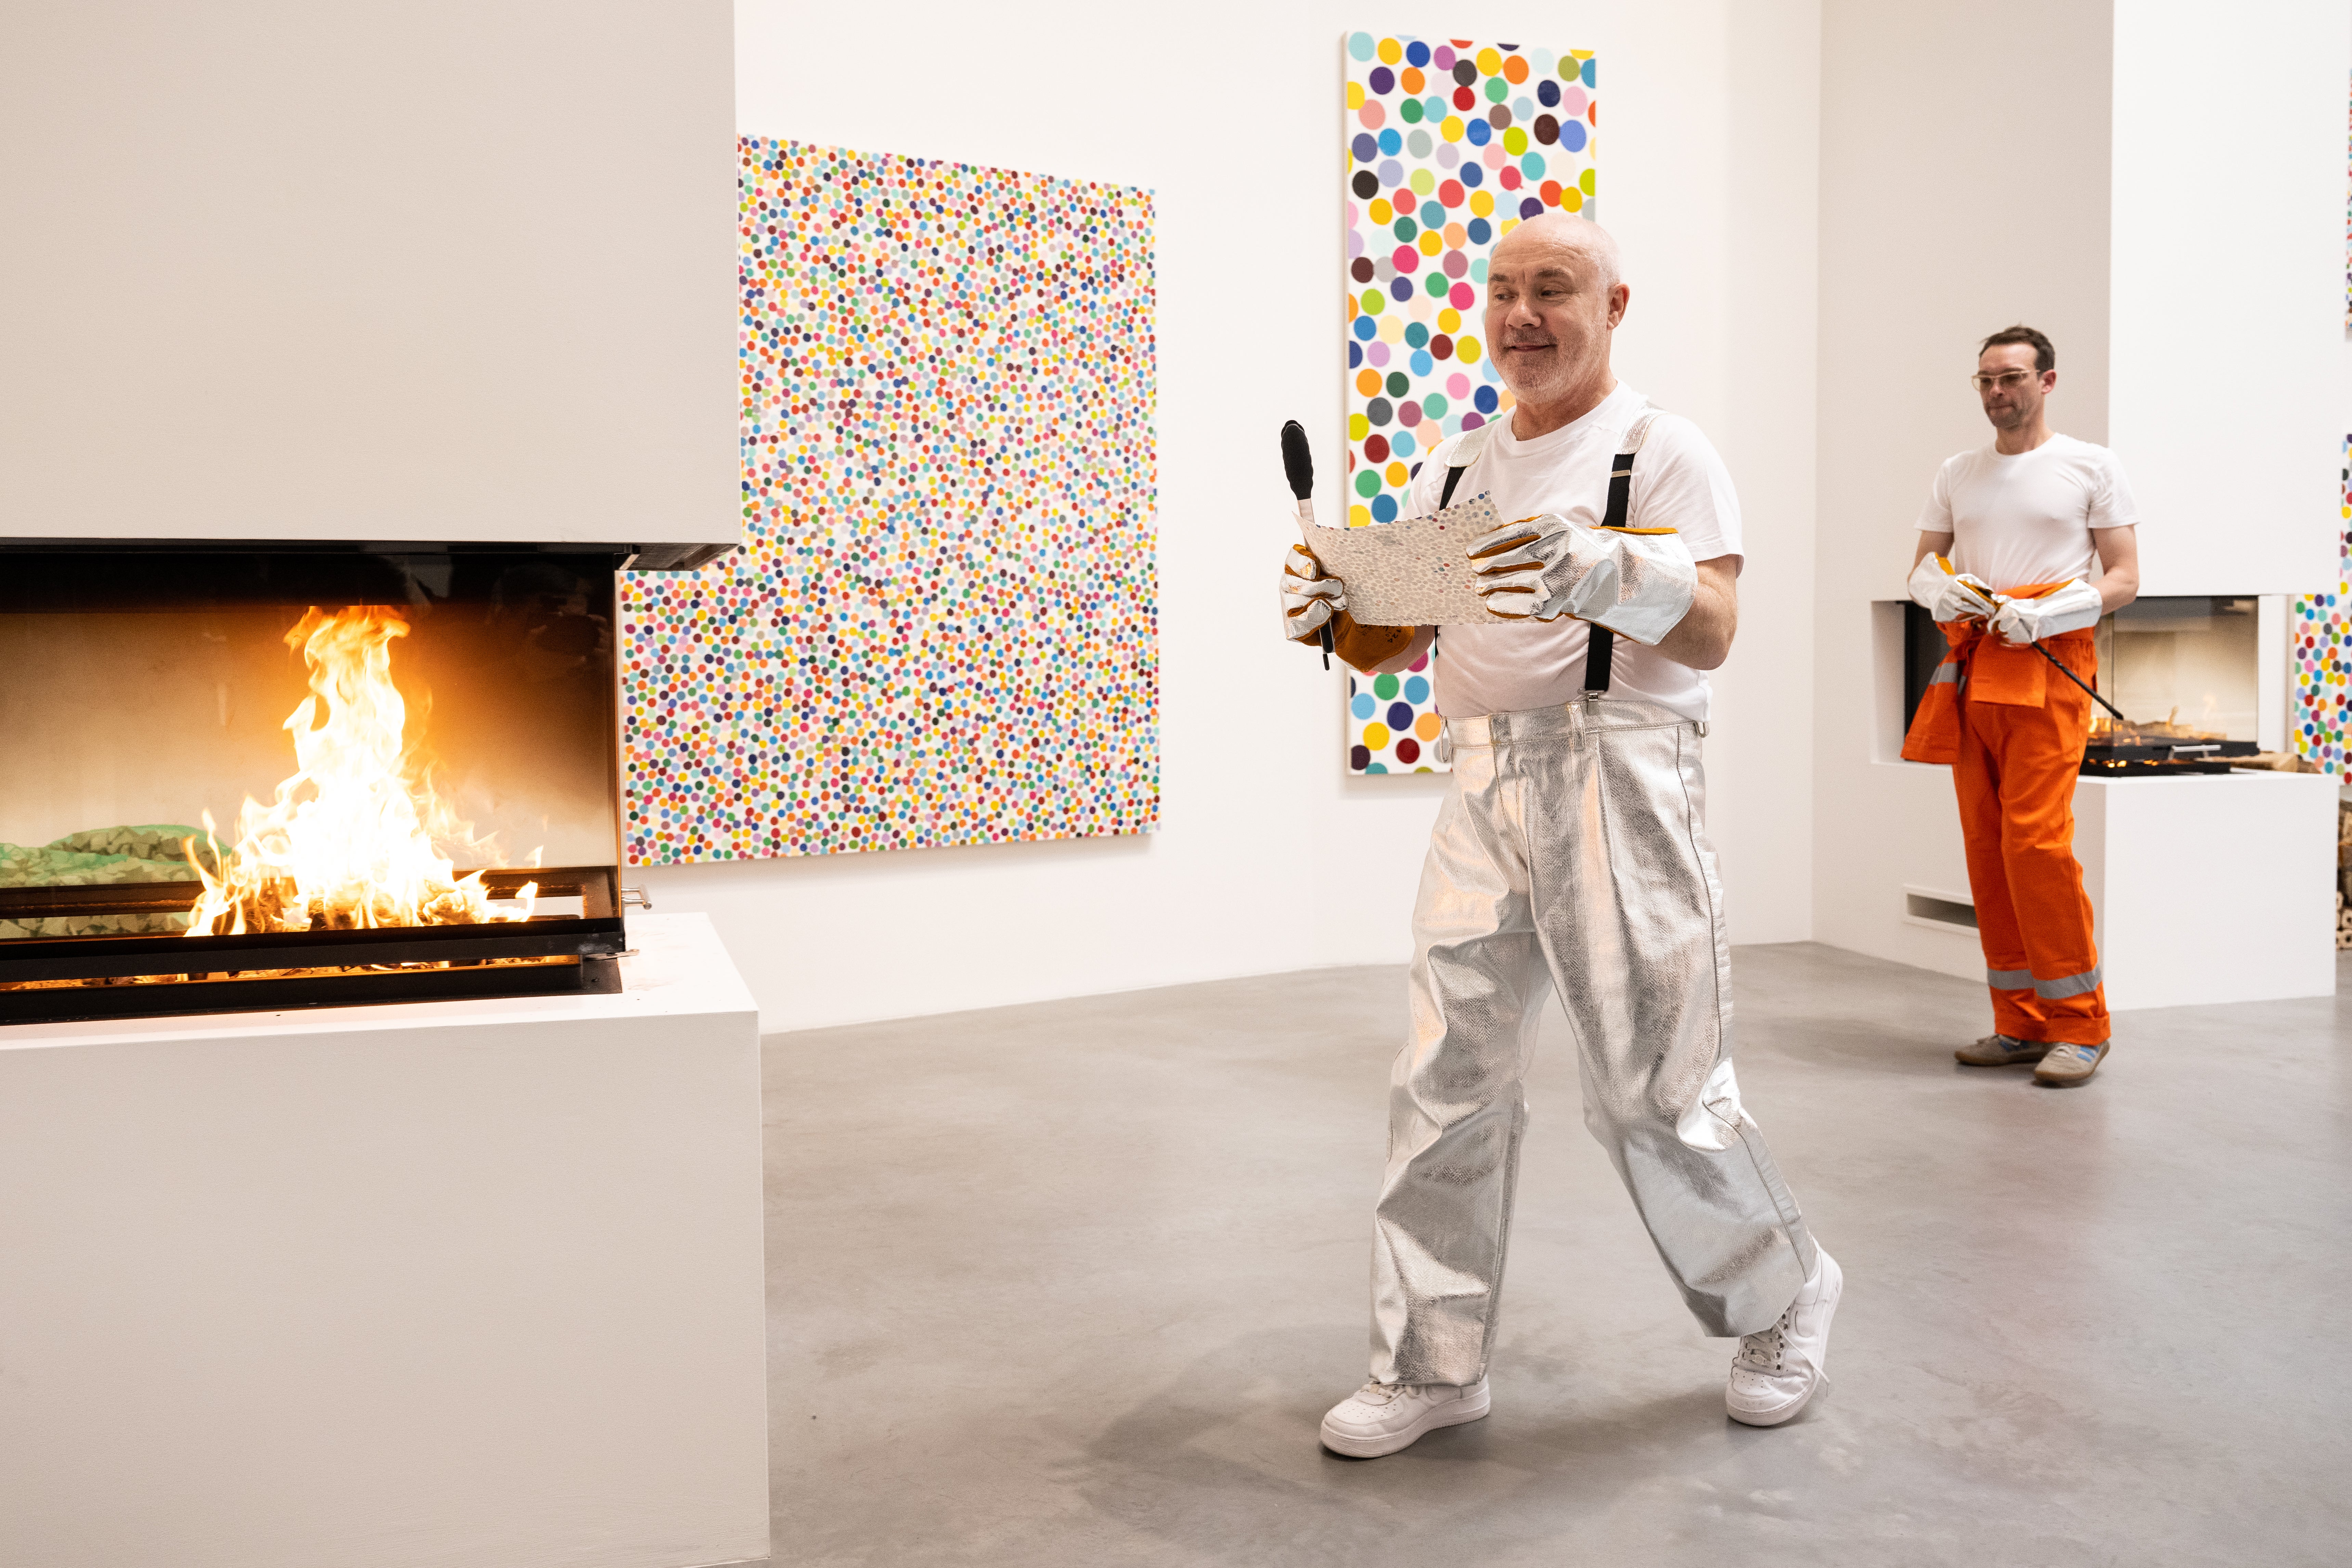 Damien Hirst takes part in the burning of artworks at Newport Street Gallery in October